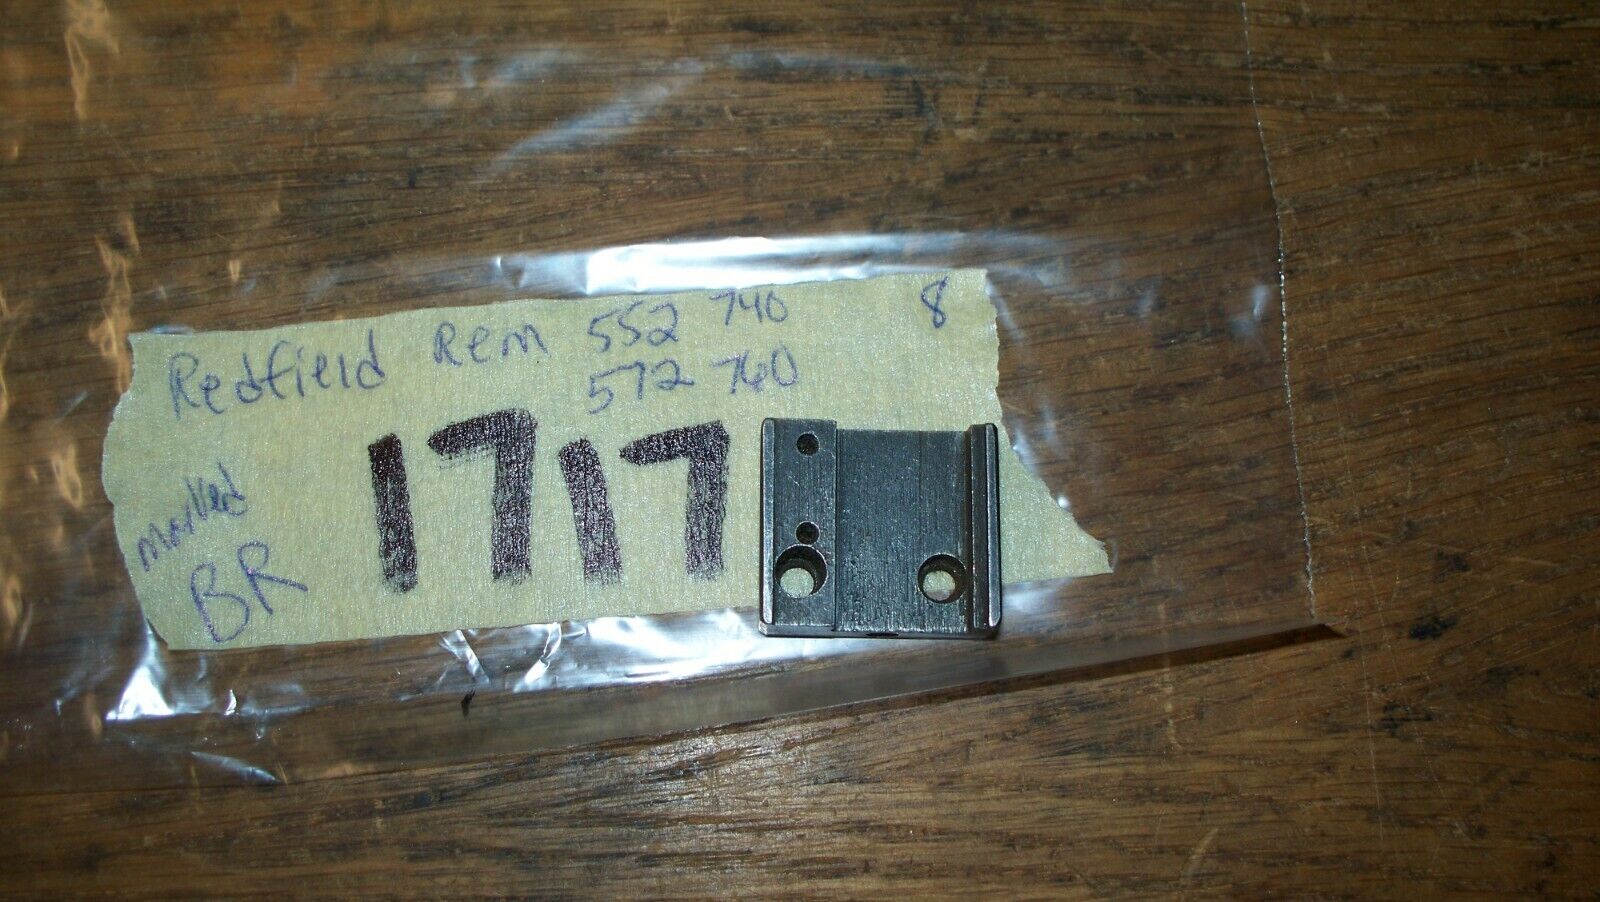 Redfield, fits Remington 552 740 572 760 models, BR receiver sight base